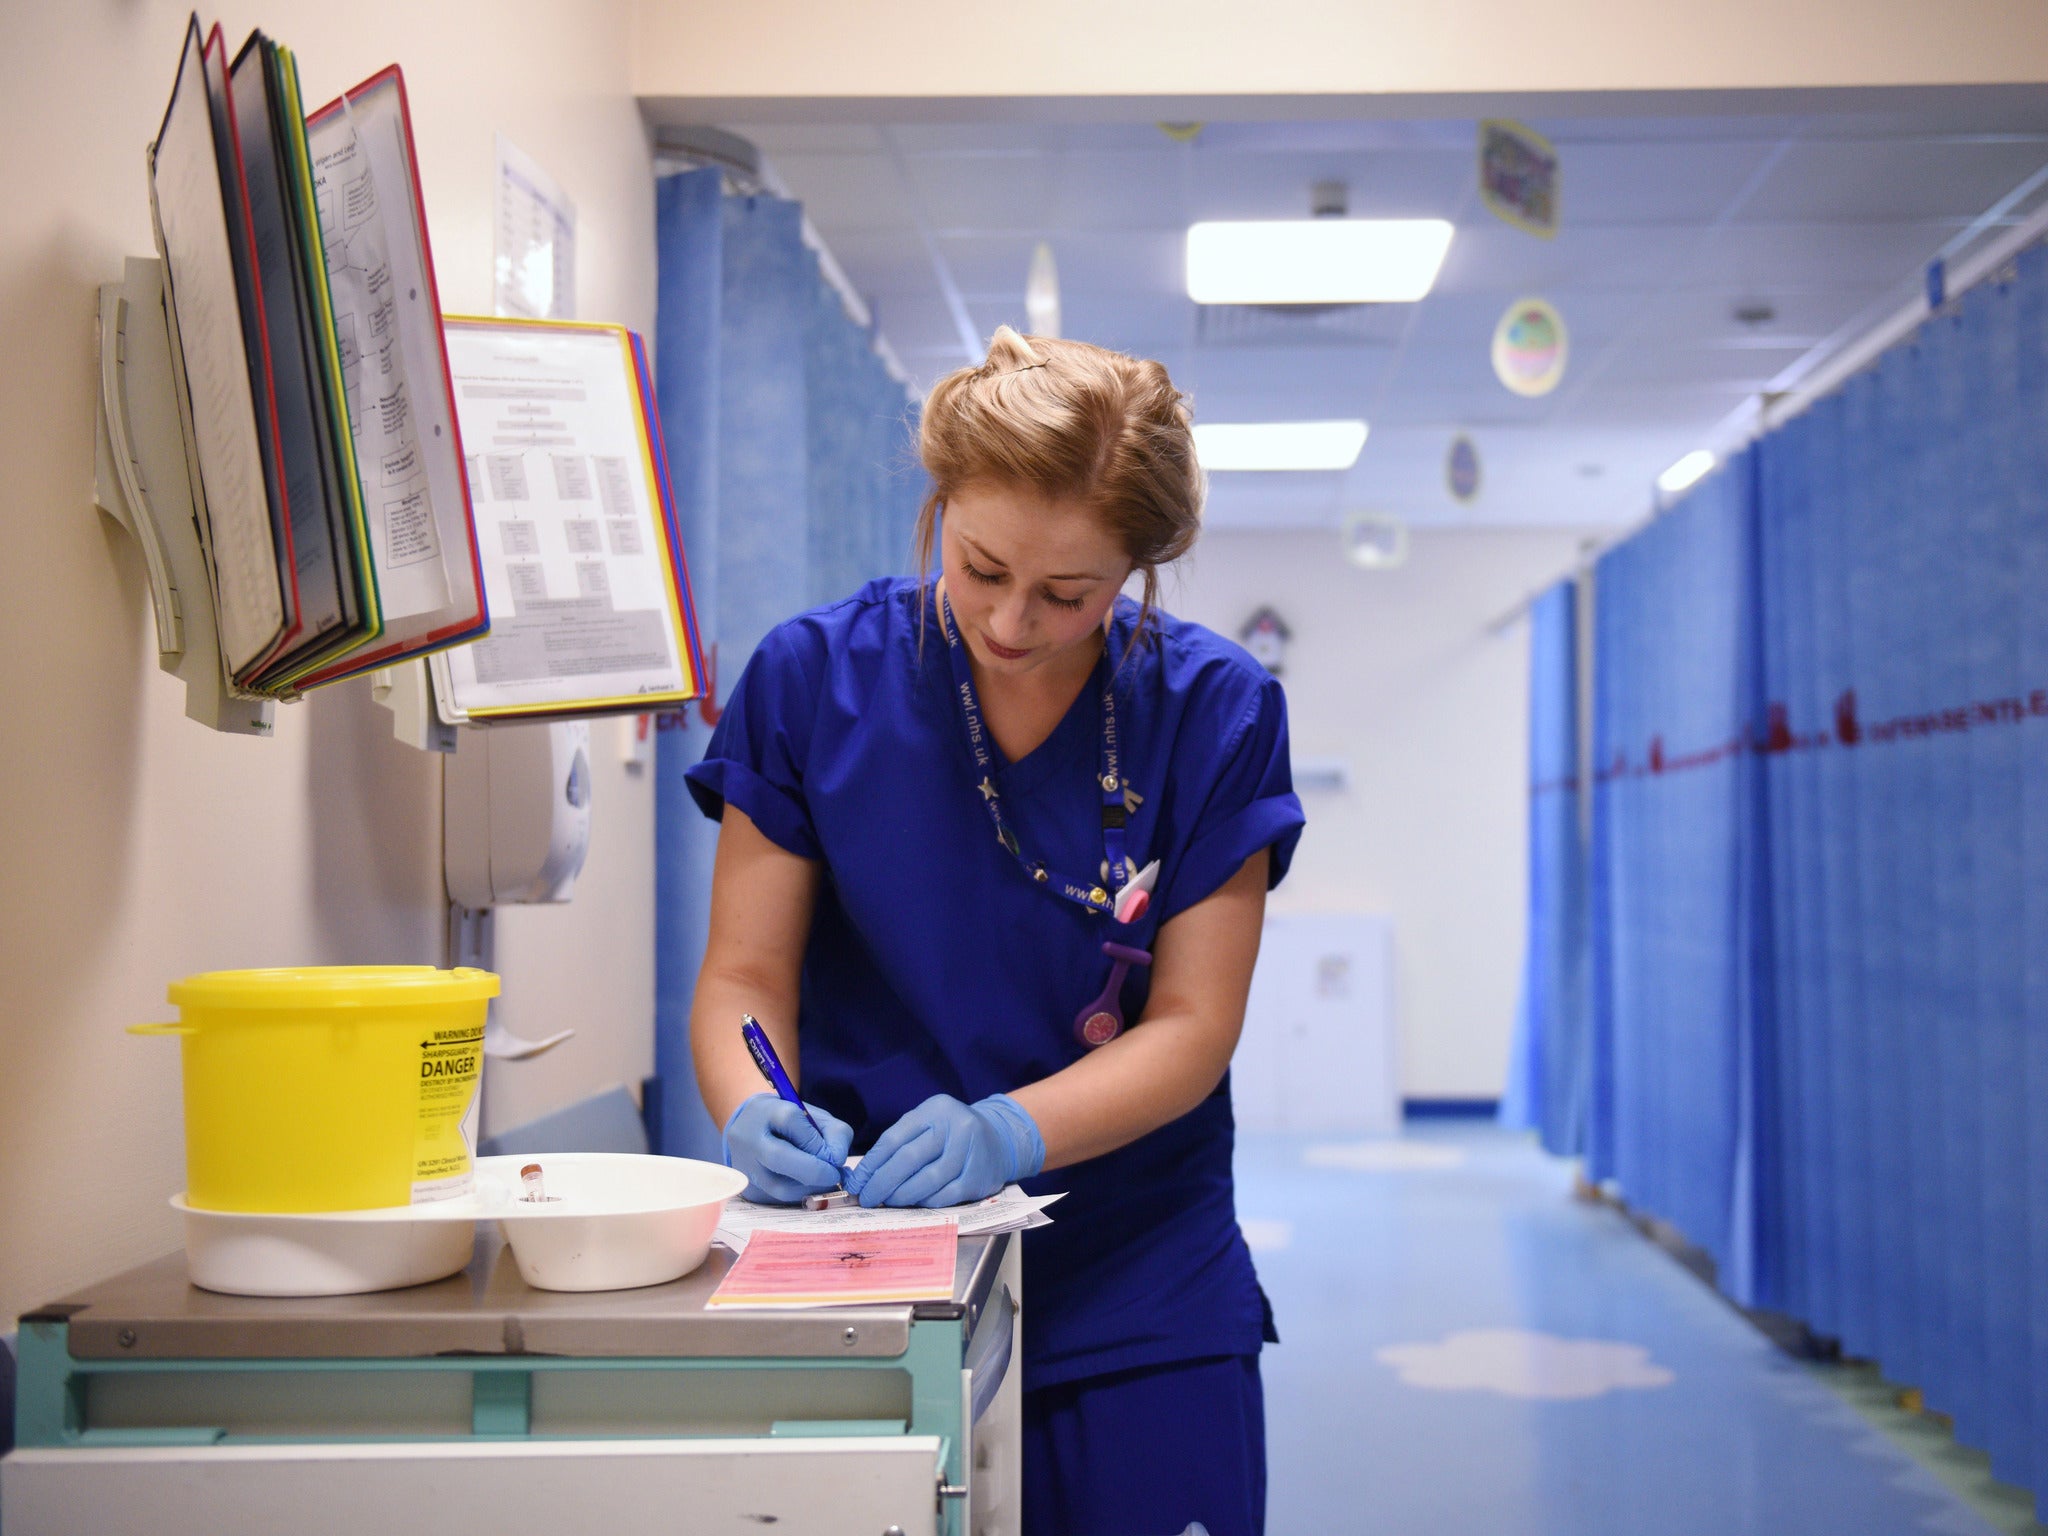 The NHS is required to make £22 billion of savings over the next five years